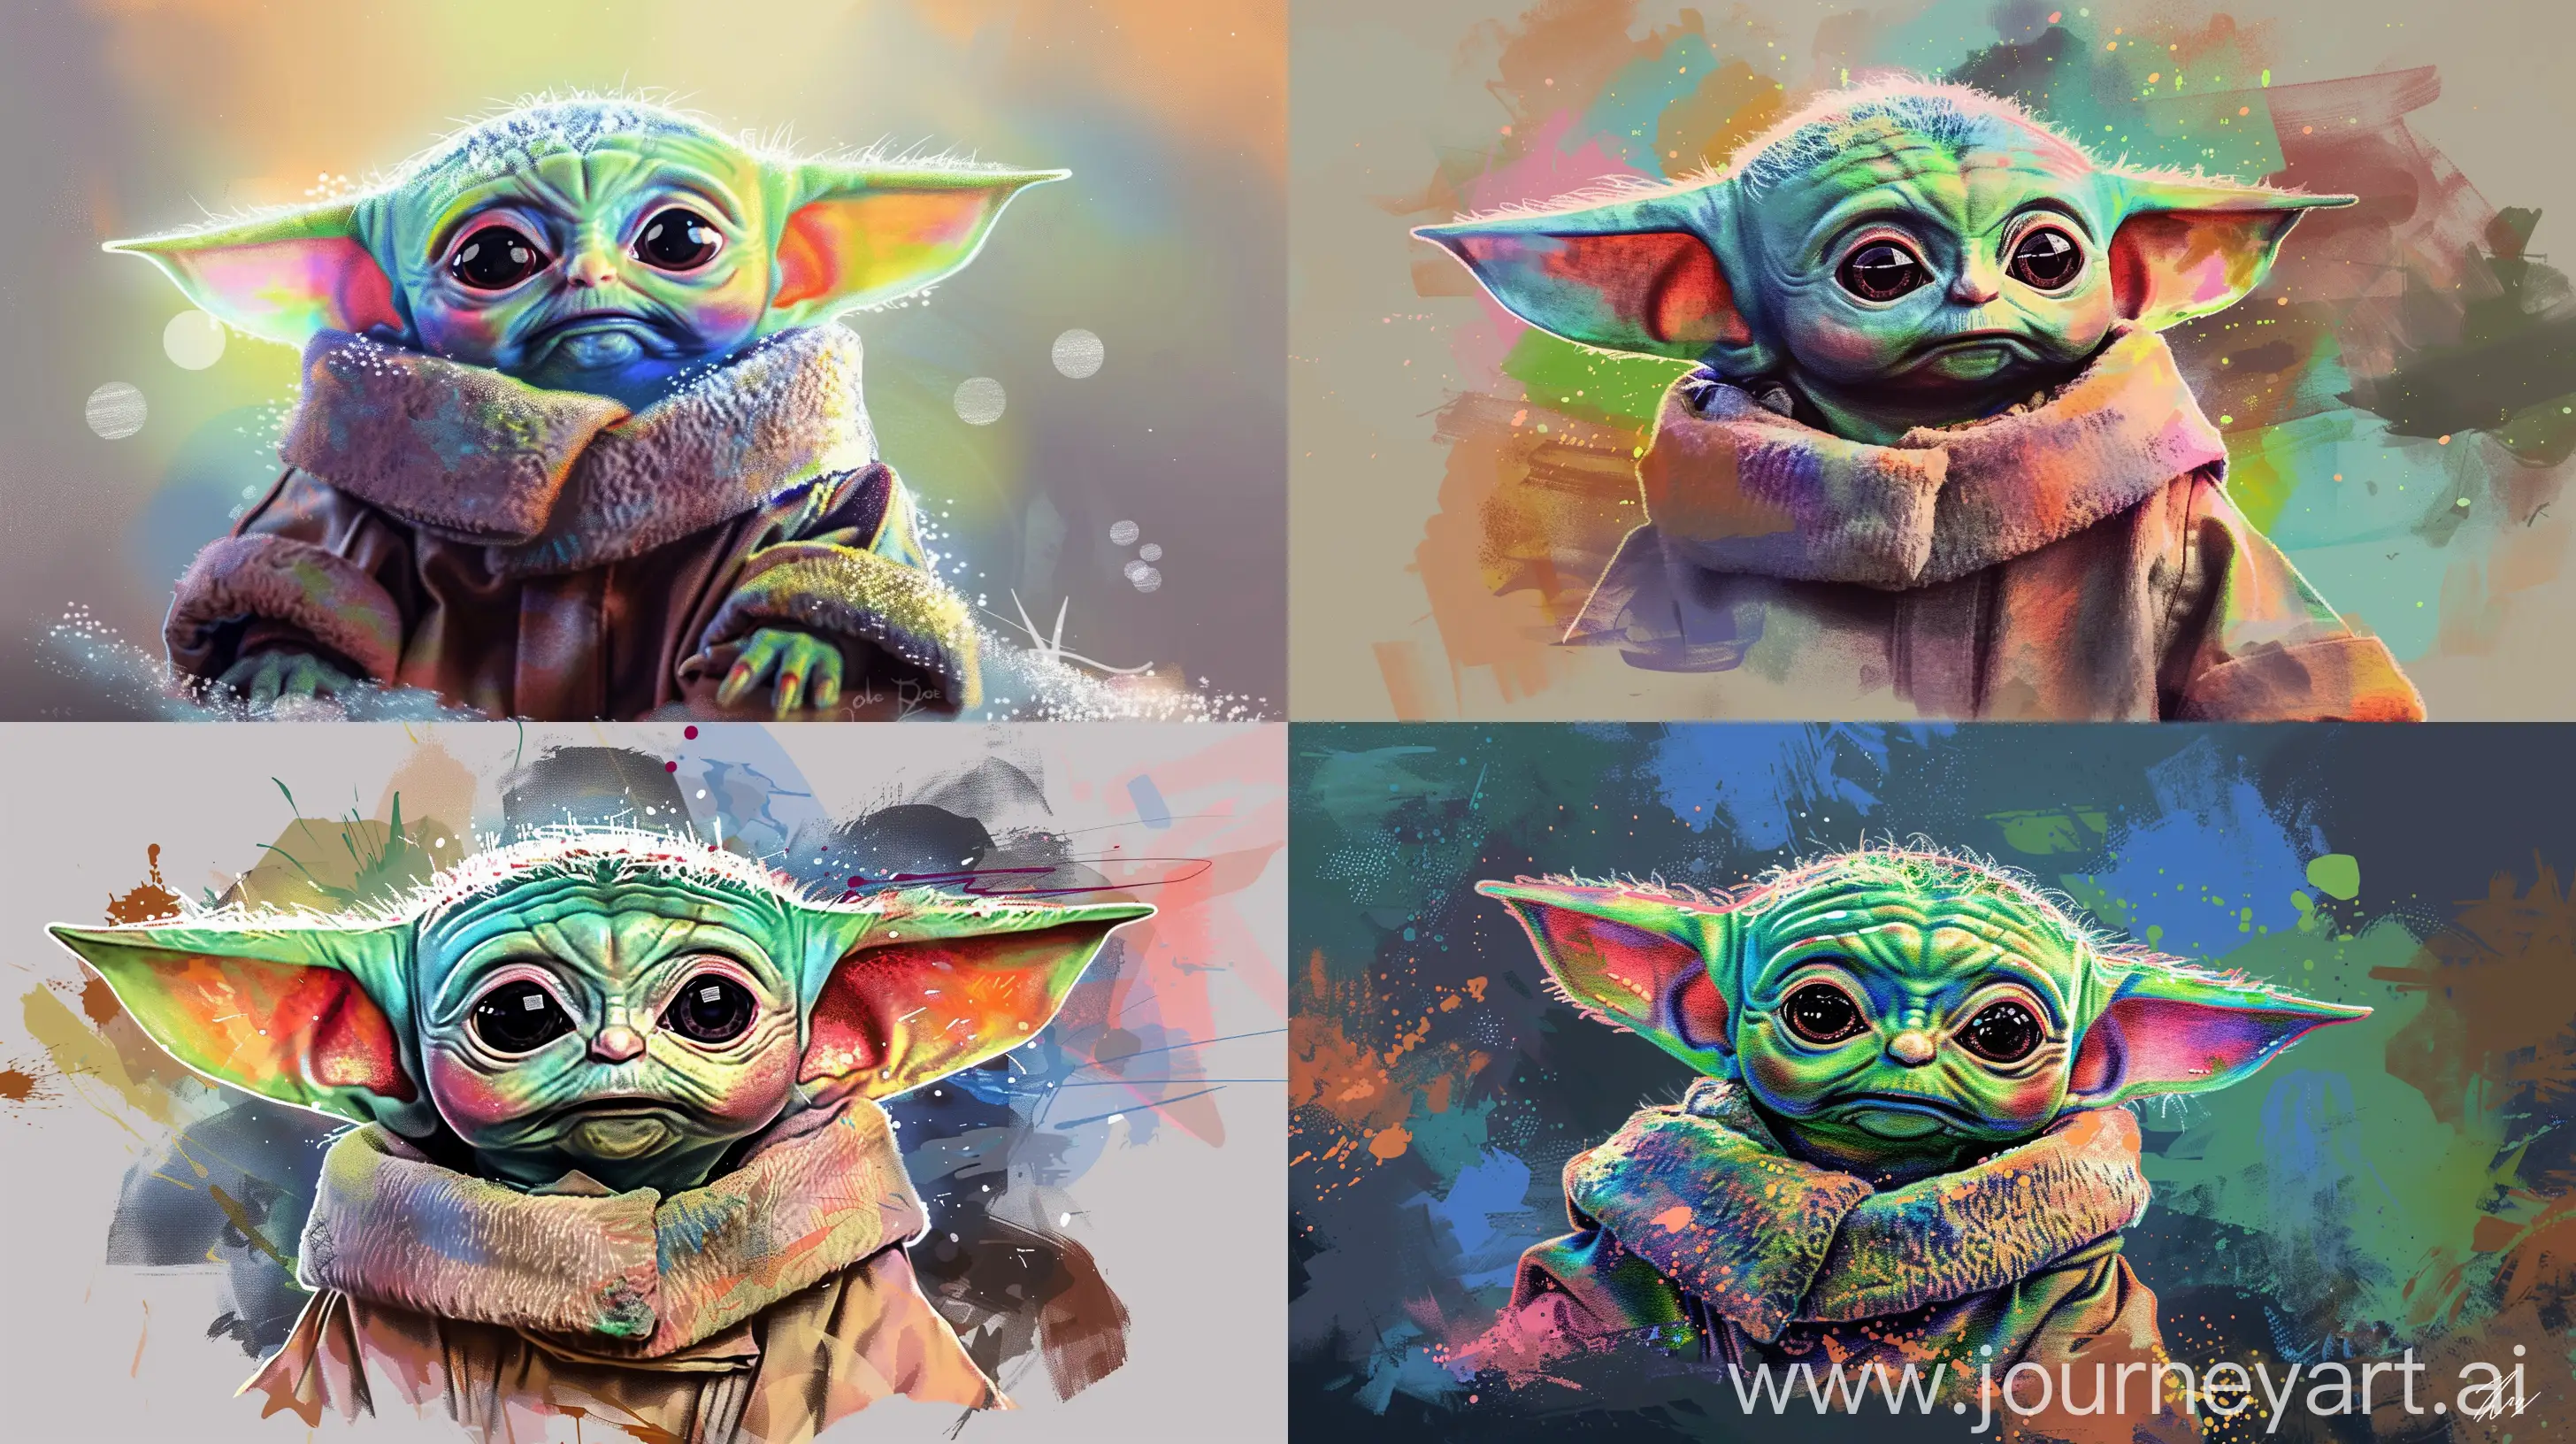 pen sketch of baby yoda, with soft vibrant pastel colors --ar 16:9
